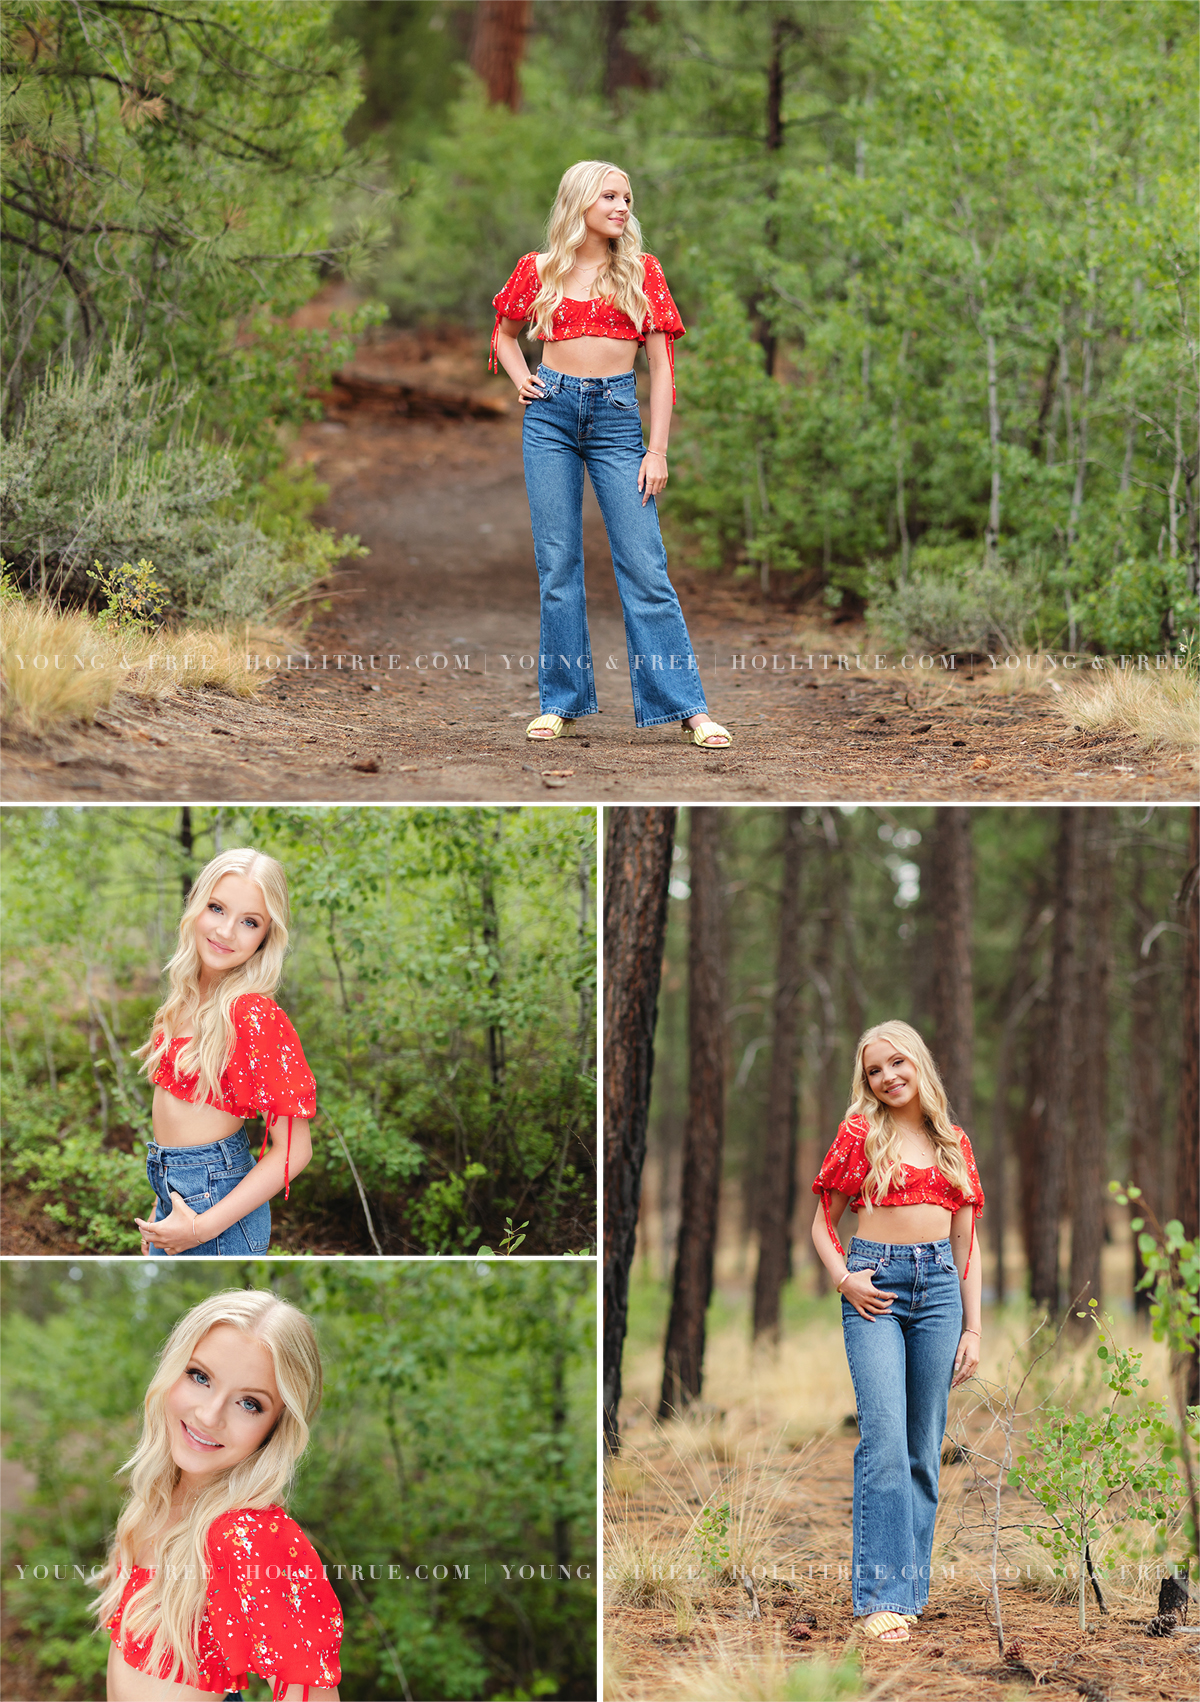 Gorgeous Bend Oregon senior pictures of a girl in a red floral shirt in a forest by Holli True Photography